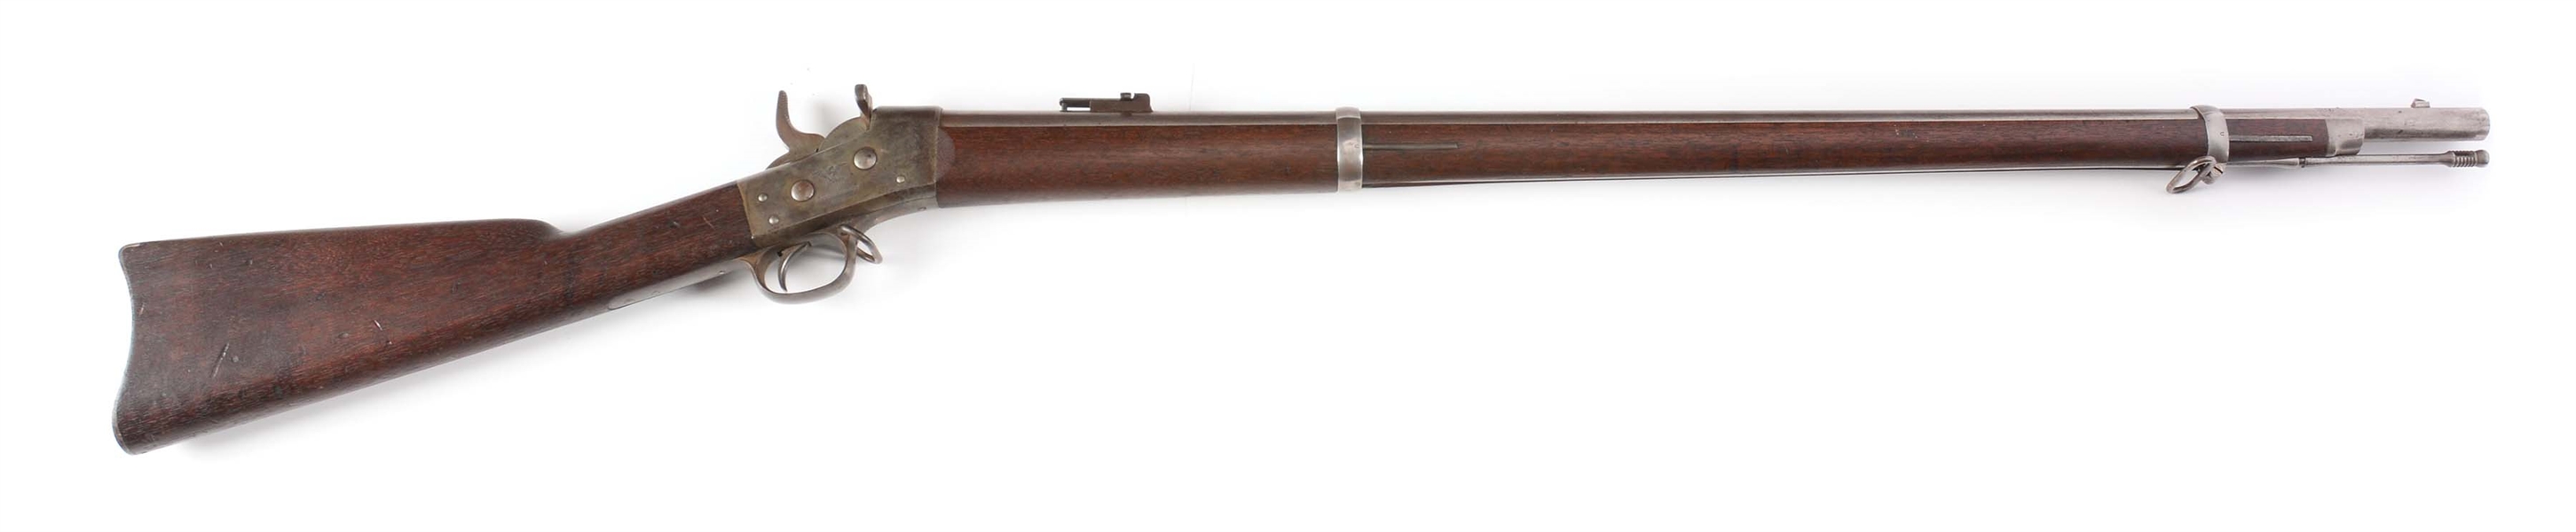 (A) US SPRINGFIELD MODEL 1871 ARMY ROLLING BLOCK RIFLE.